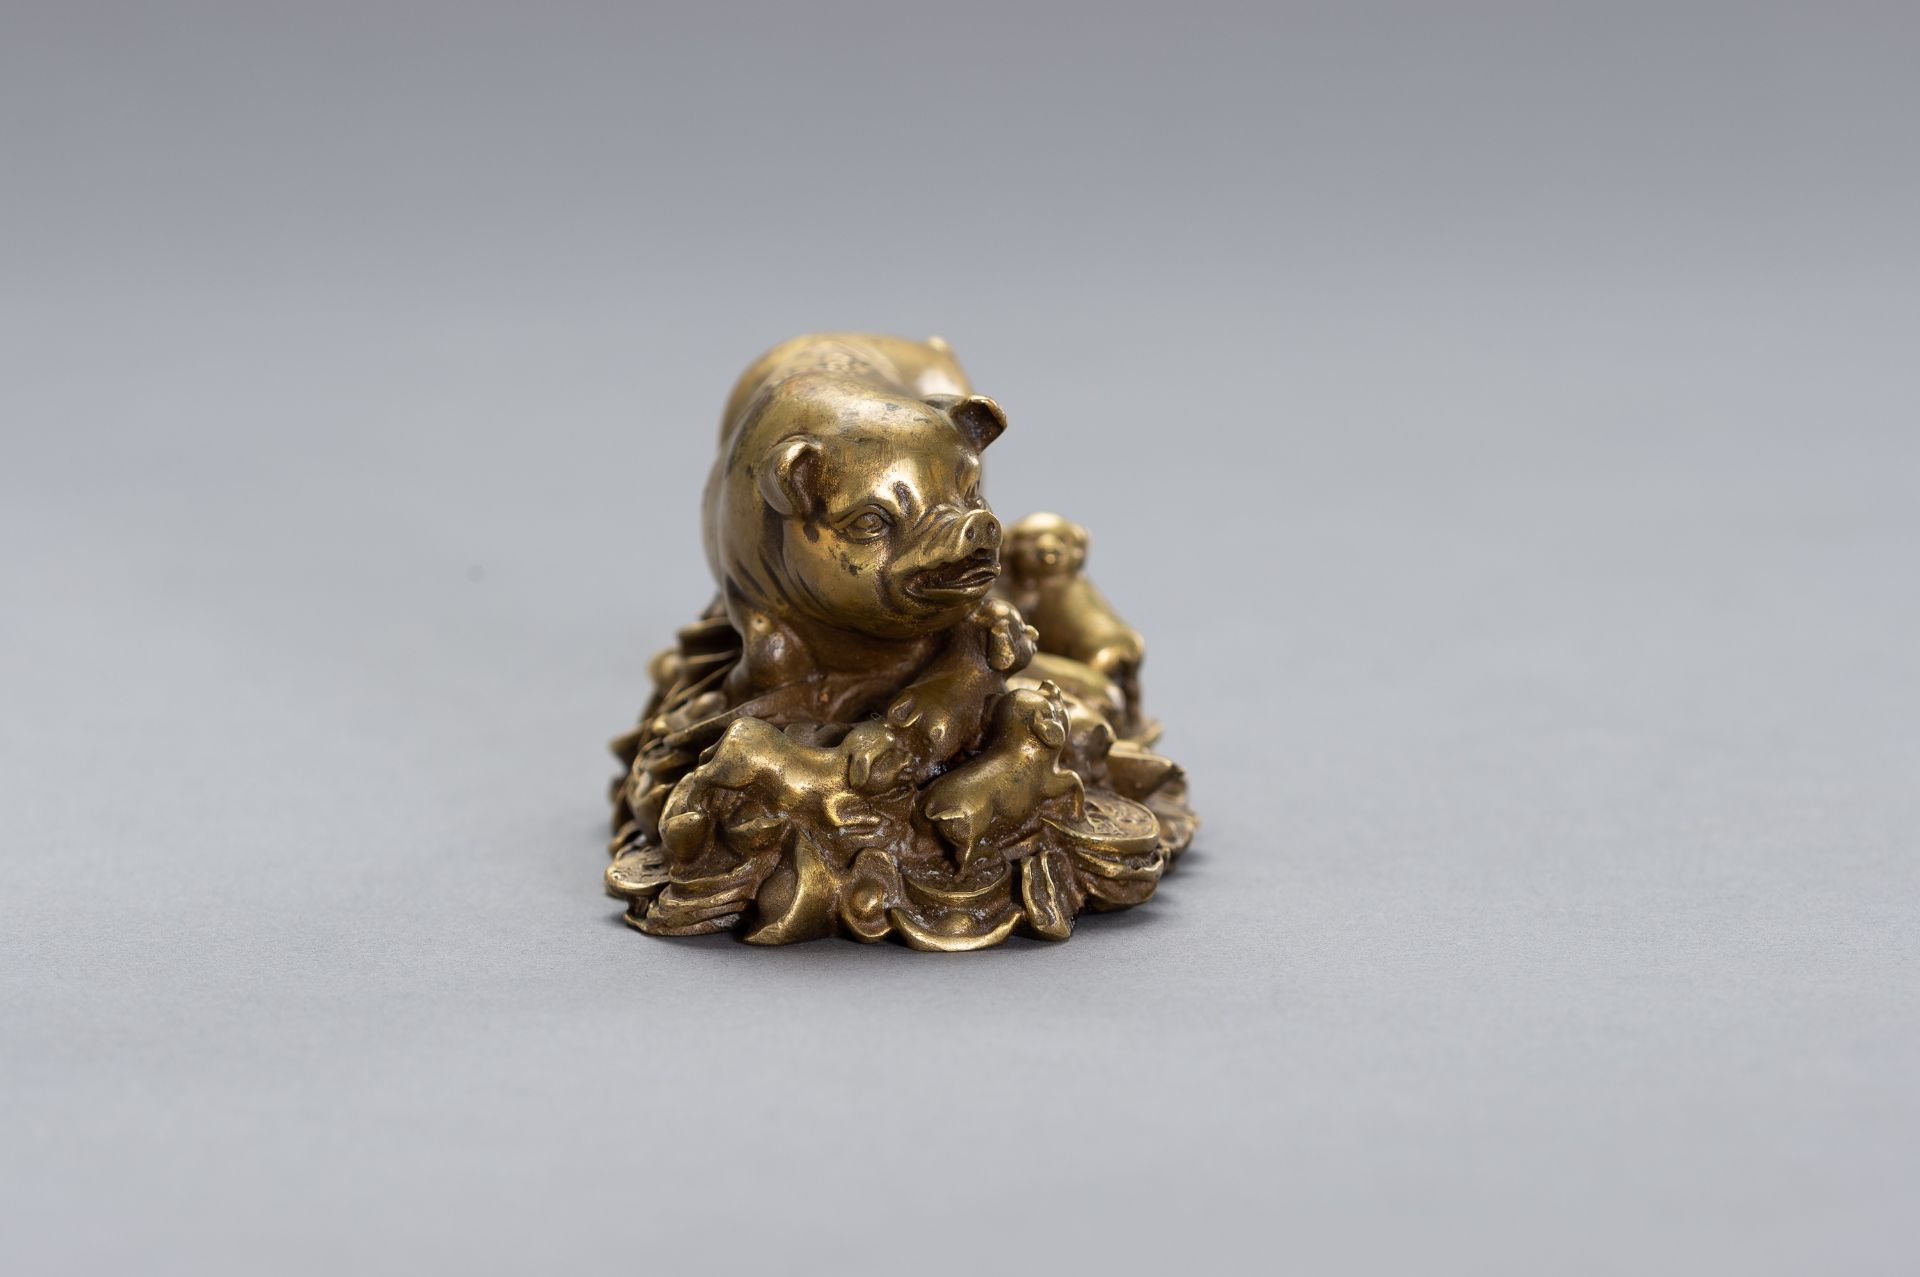 A BRONZE LUCKY CHARM OF A SOW WITH HER YOUNG - Image 6 of 10